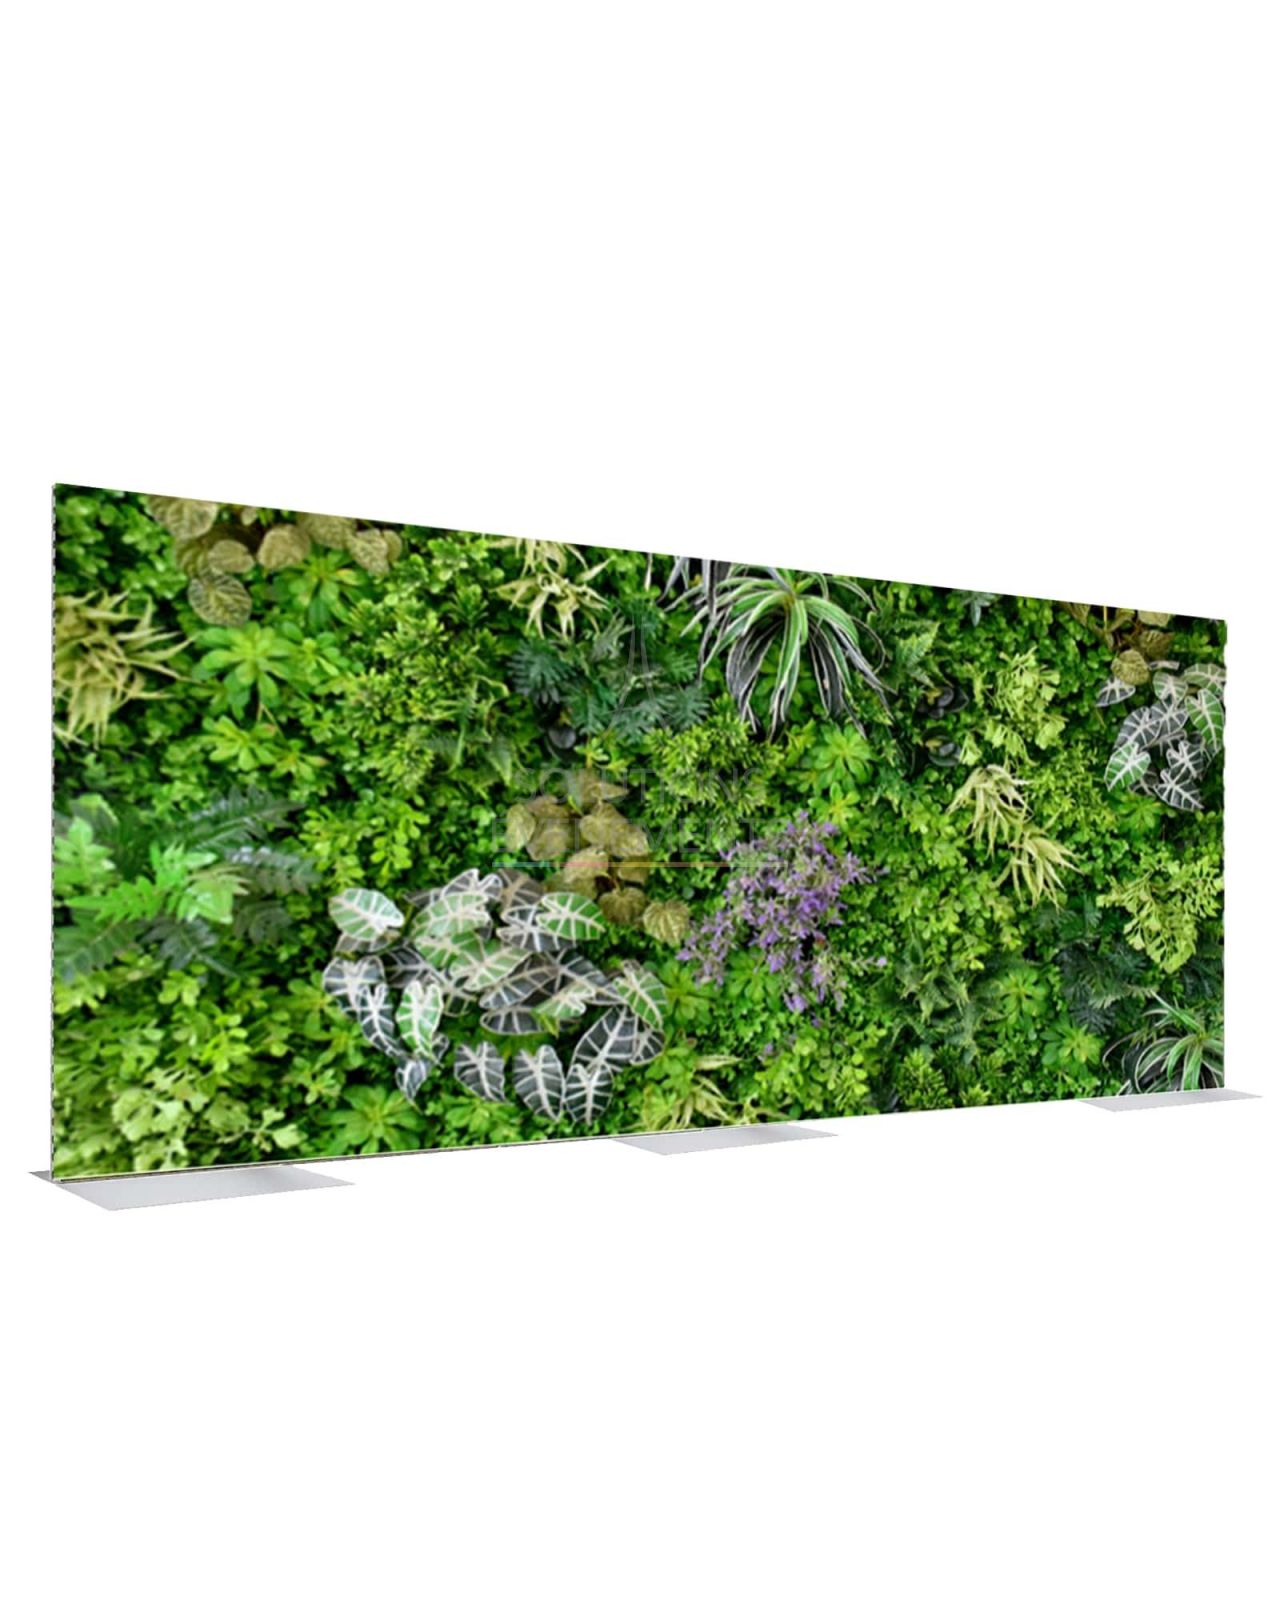 Rental of plant backdrops for your events